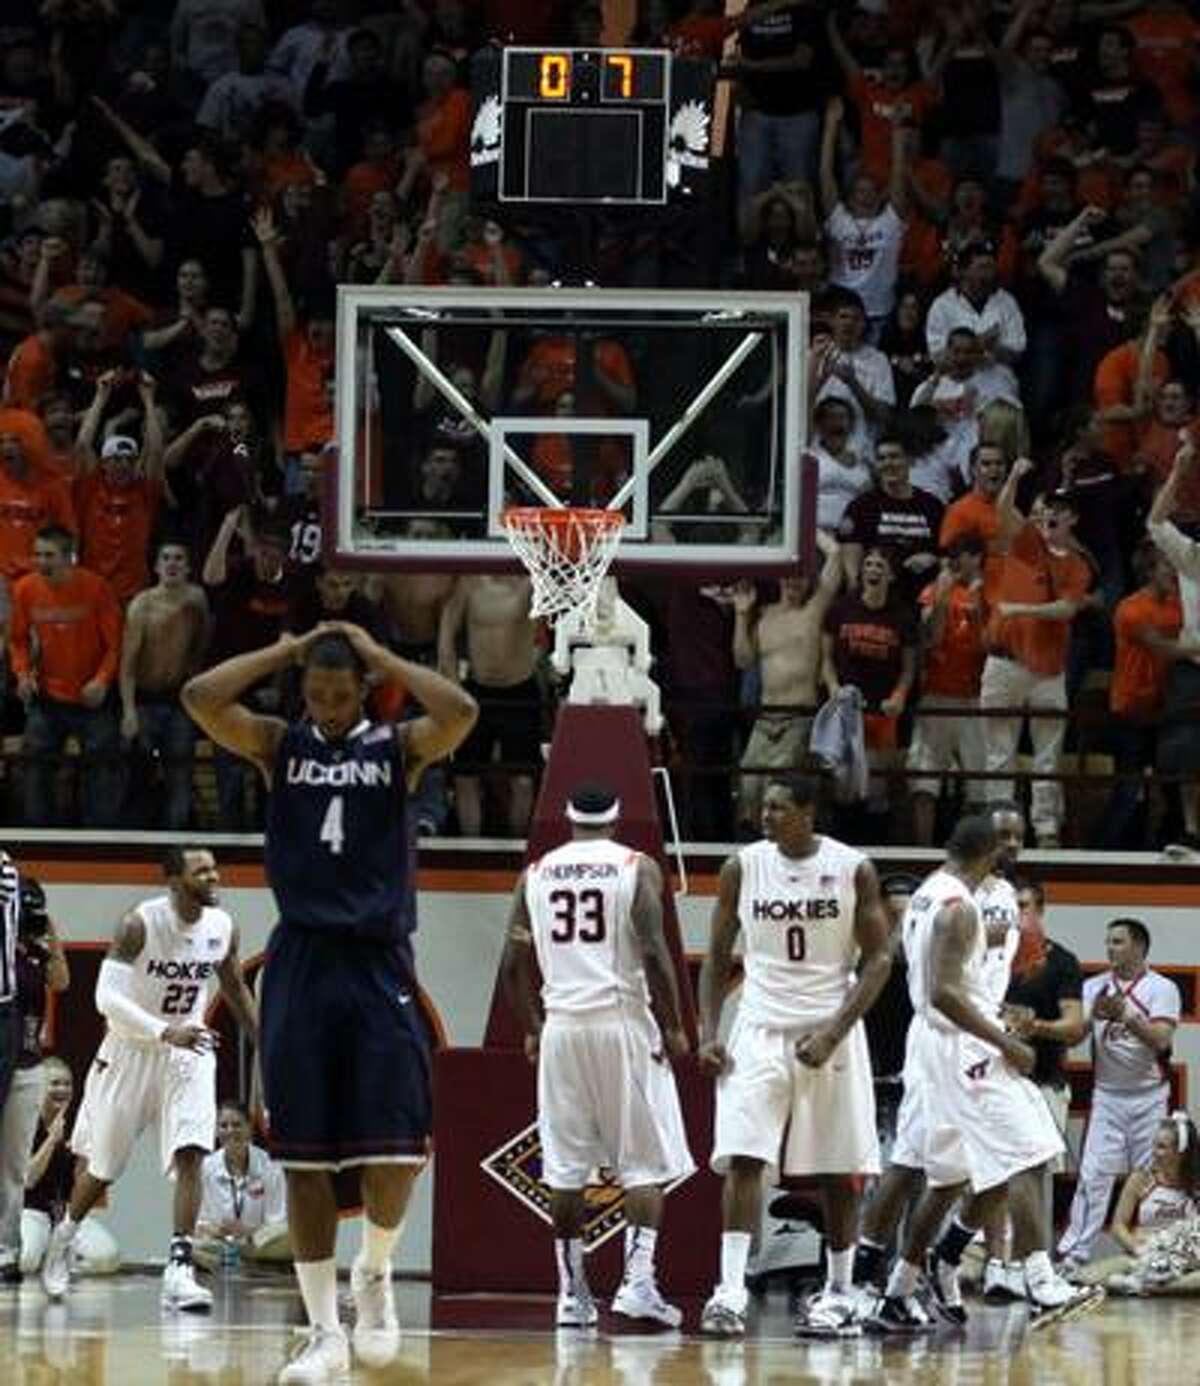 Connecticut's Jamal Coombs-McDaniel (4) walks away as Virginia Tech players celebrate a defensive stop and foul with less than a second left in a second-round NIT college basketball game in Blacksburg, Va., Monday. (Associated Press)